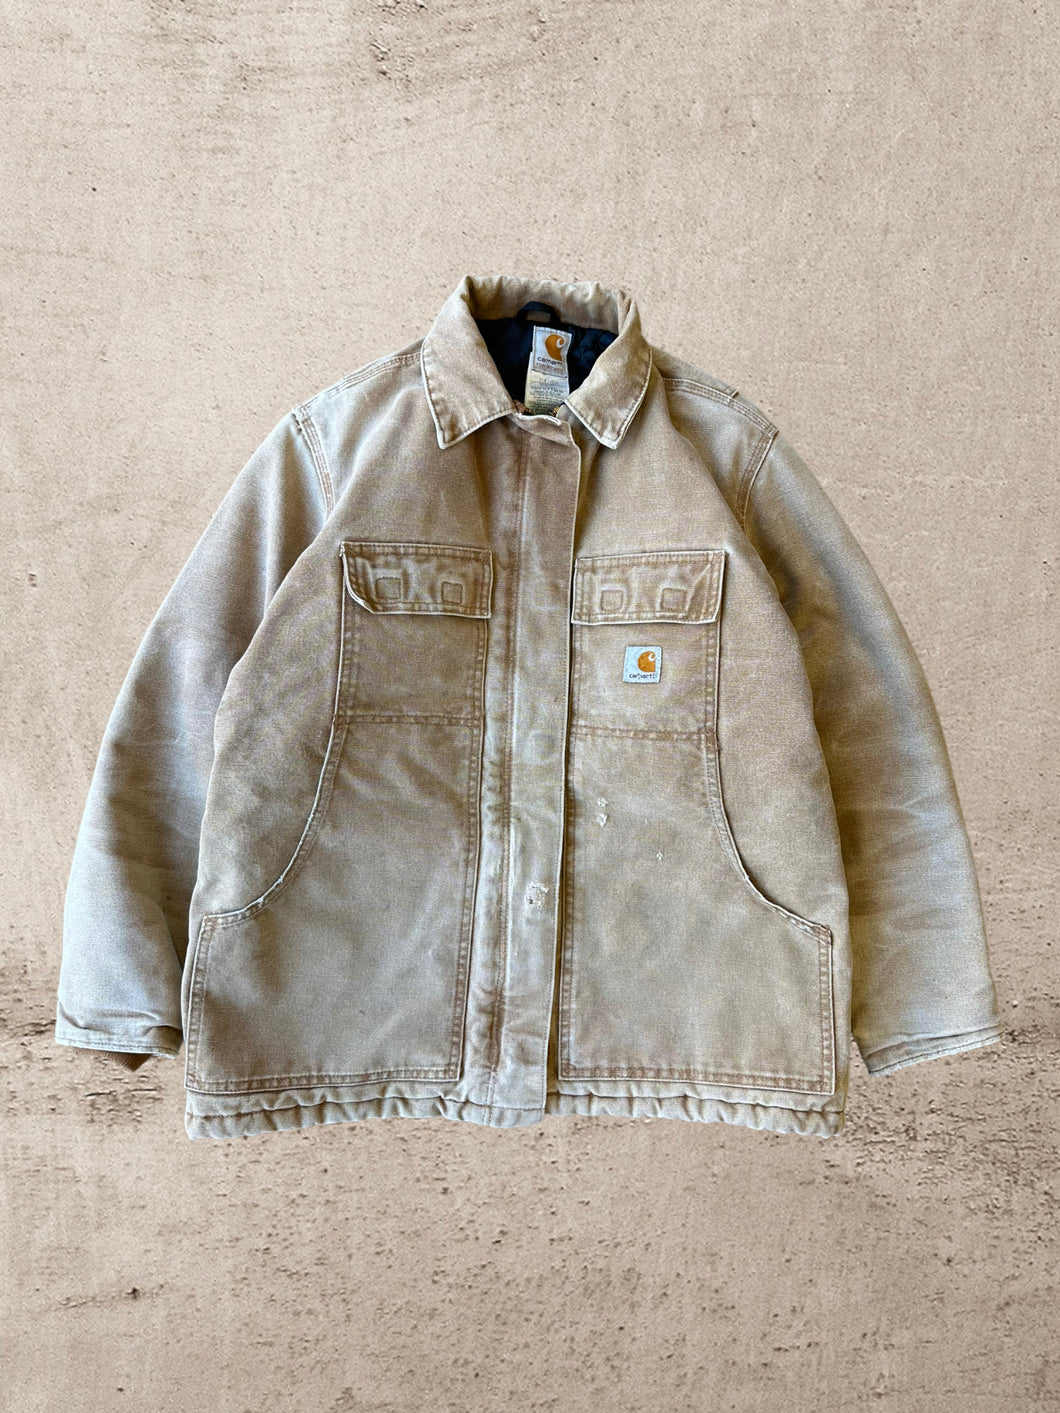 Vintage Carhartt Quilted Lined Jacket - Small